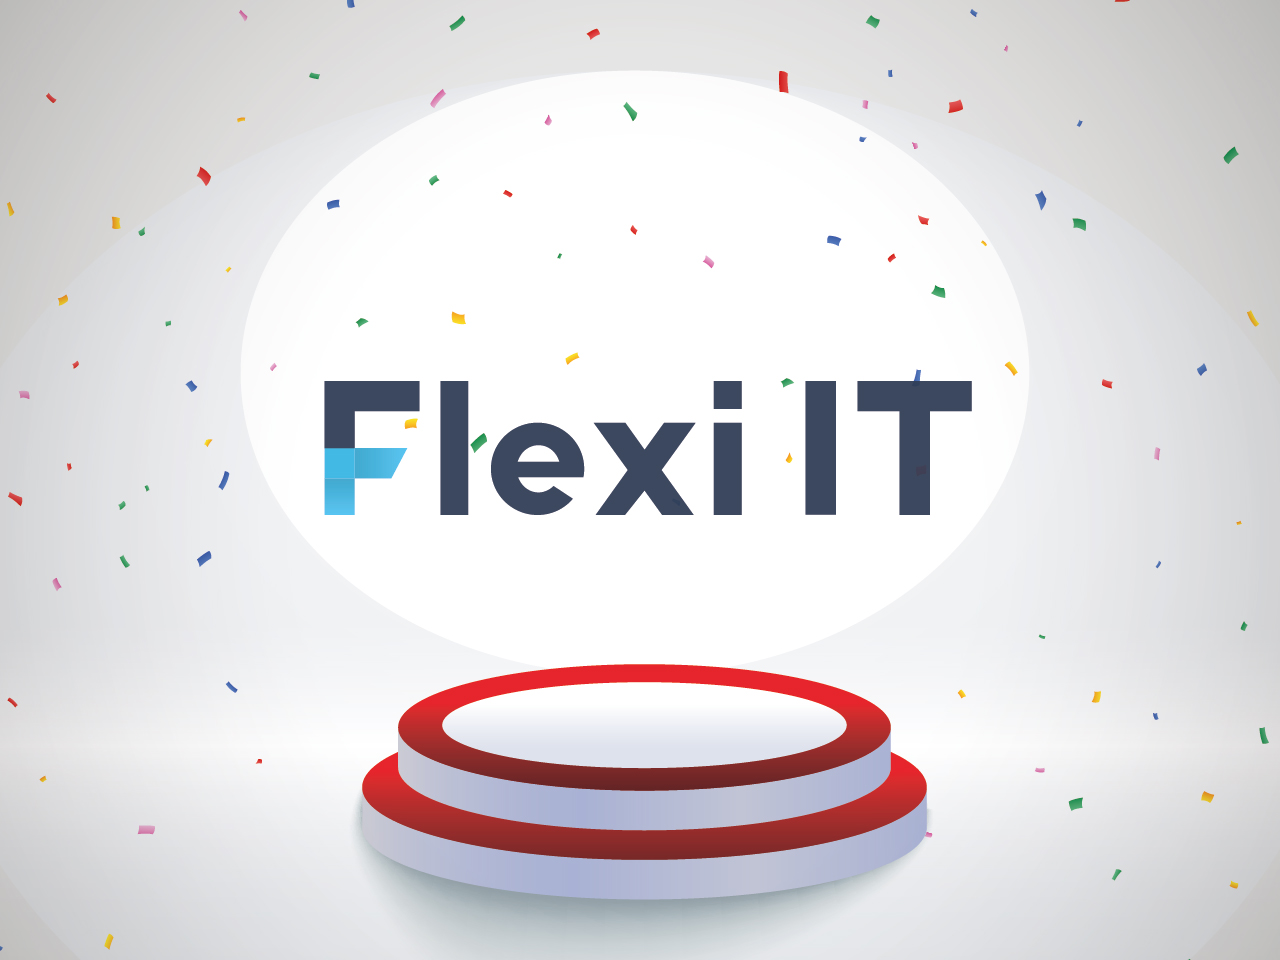 Flexi IT is Listed Among Top 20 Wordpress Development Companies by IT Firms